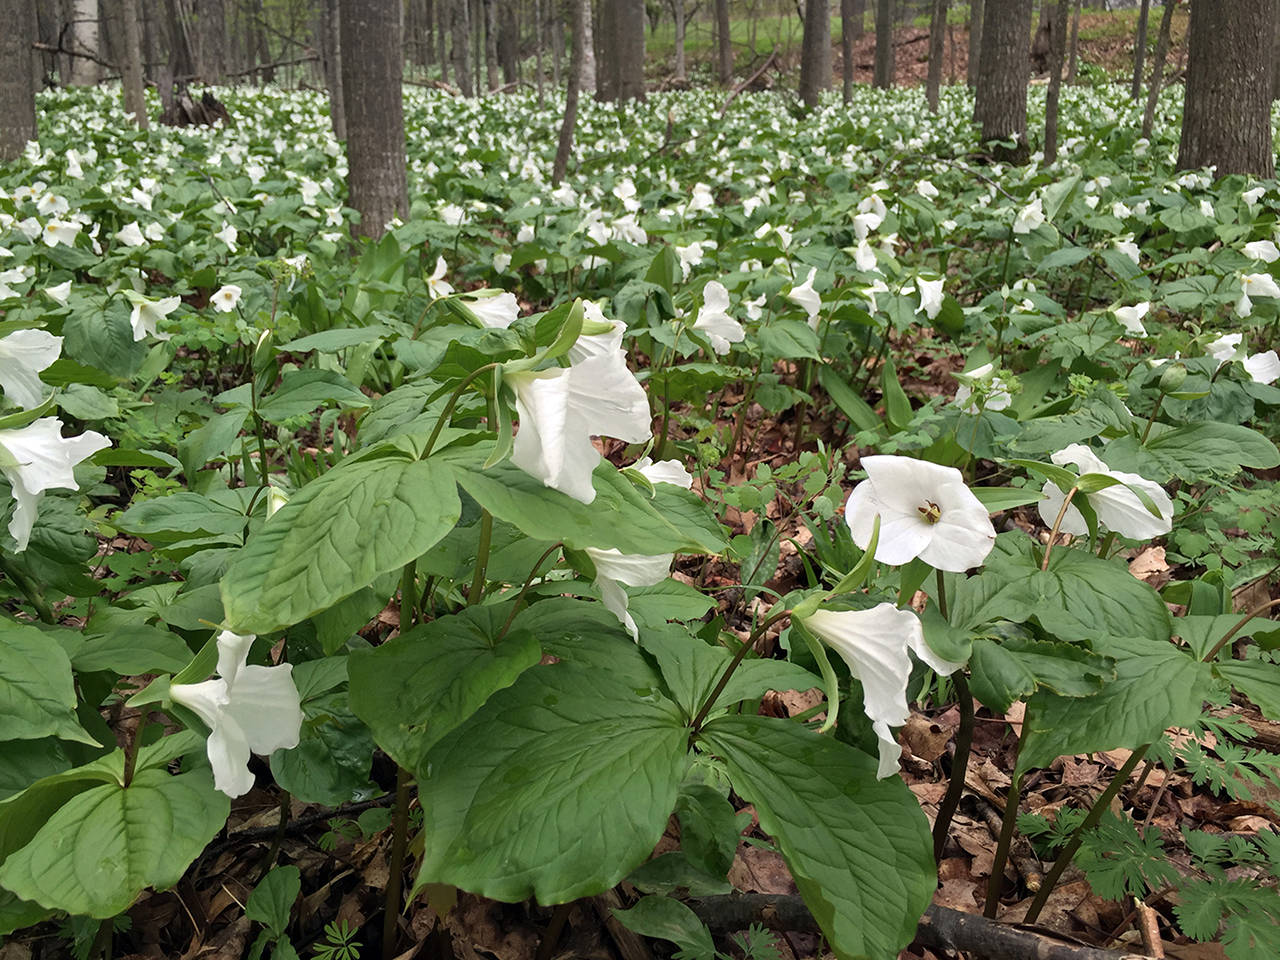 Trilliums bloom near Devils Elbow along the Tunnel of Trees, a scenic route along Lake Michigan. (Bob DeMay/Akron Beacon Journal)